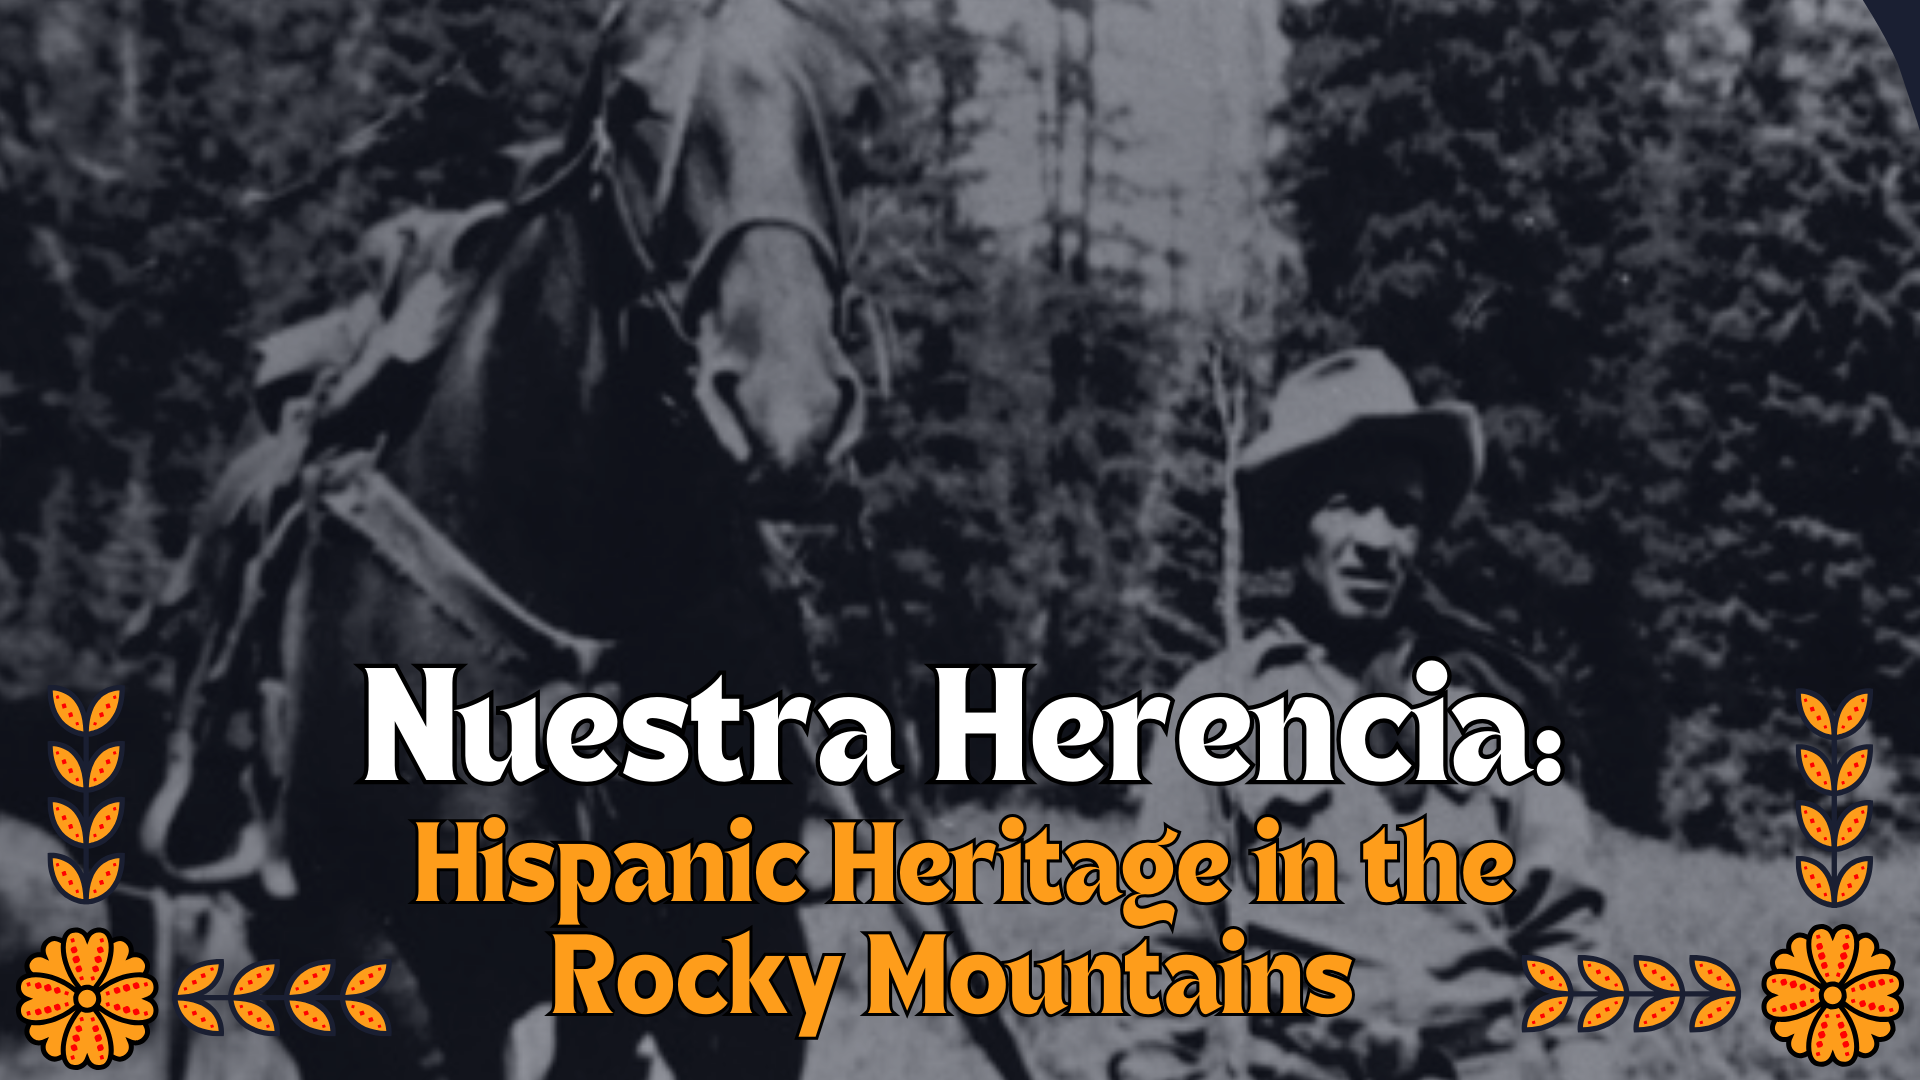 Nuestra Herencia: Hispanic Heritage in the Rocky Mountains